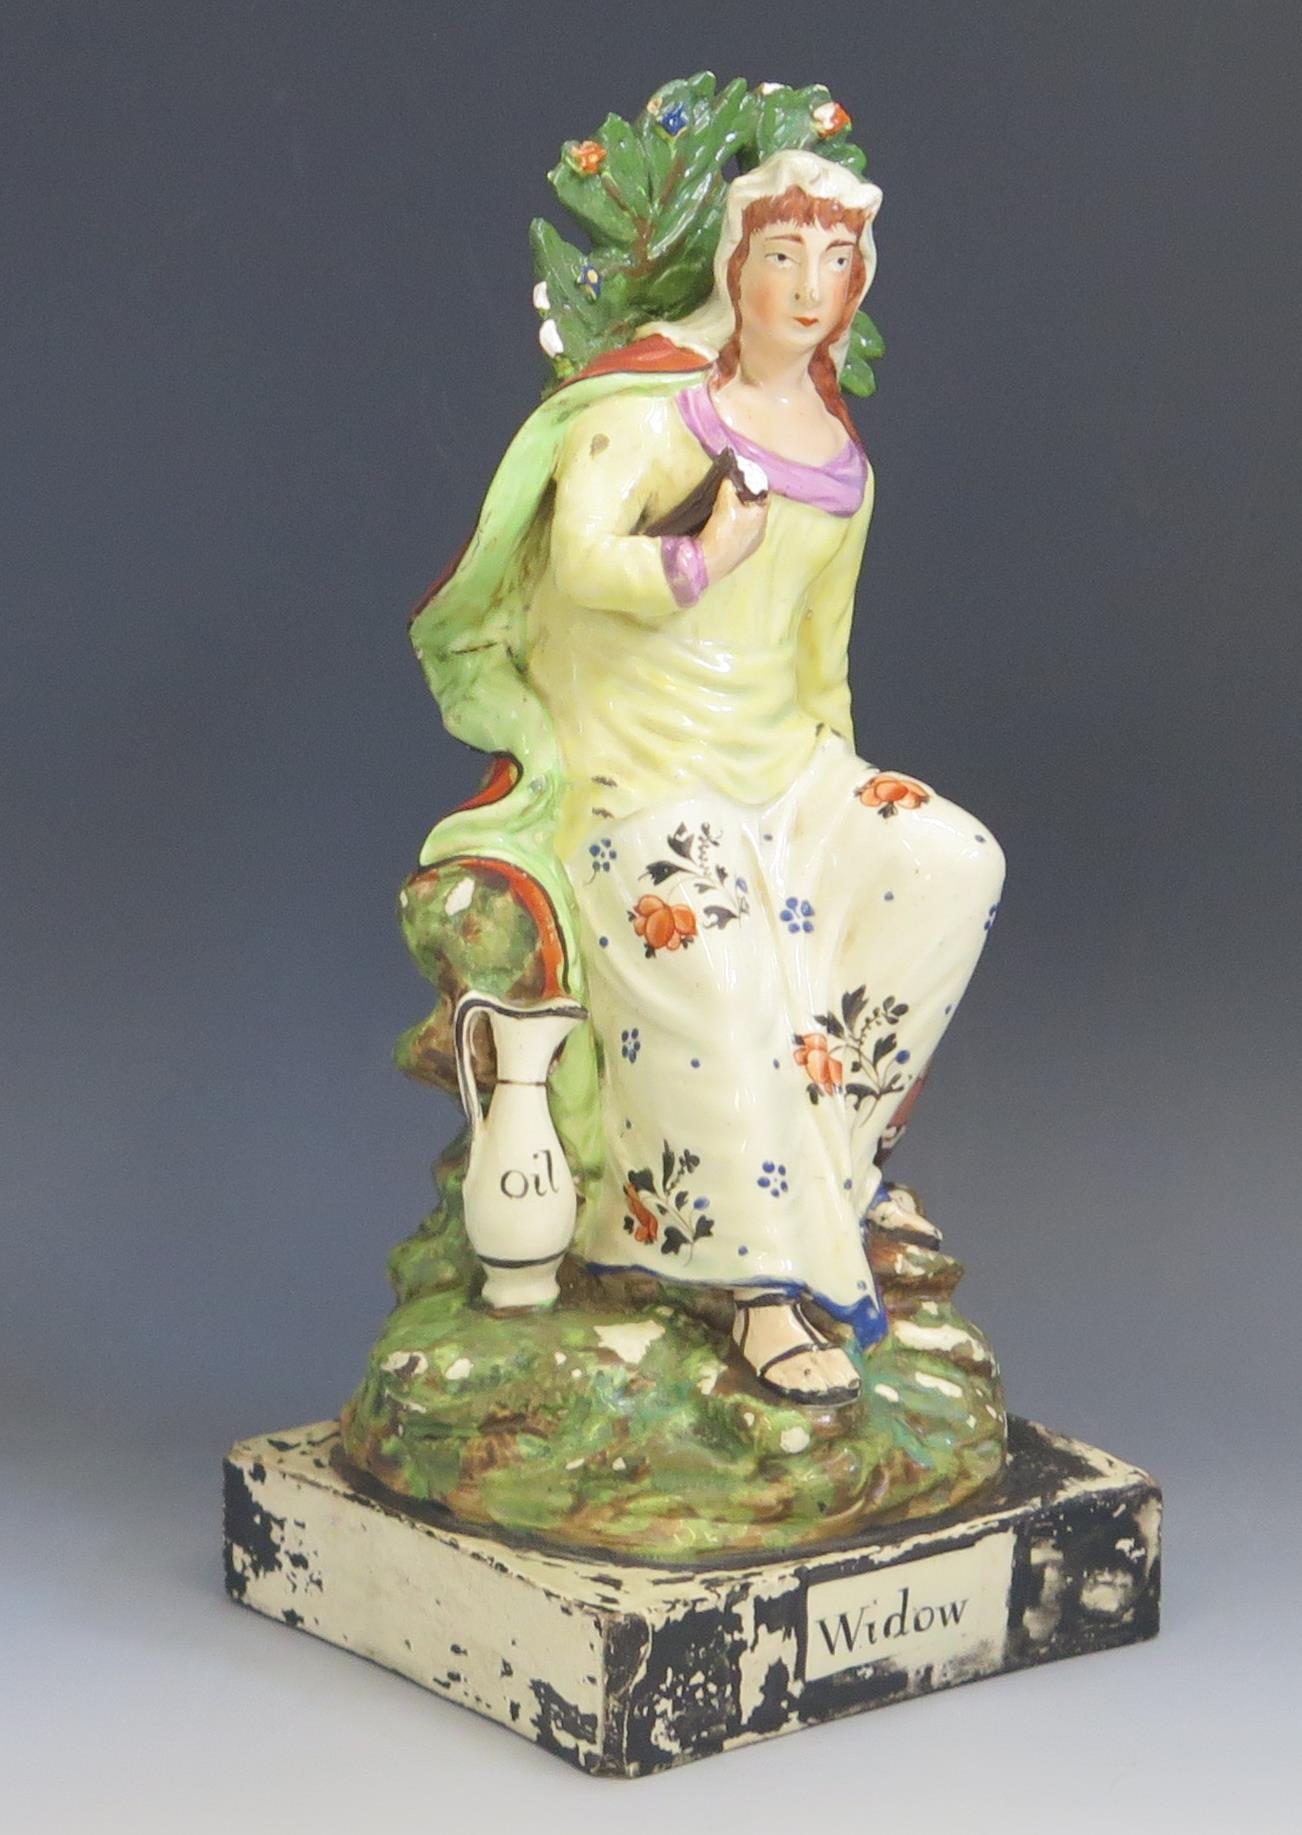 A Staffordshire pottery pearlware figure 'Widow' 26cm high. Chips to the foliage and loss of - Image 2 of 2